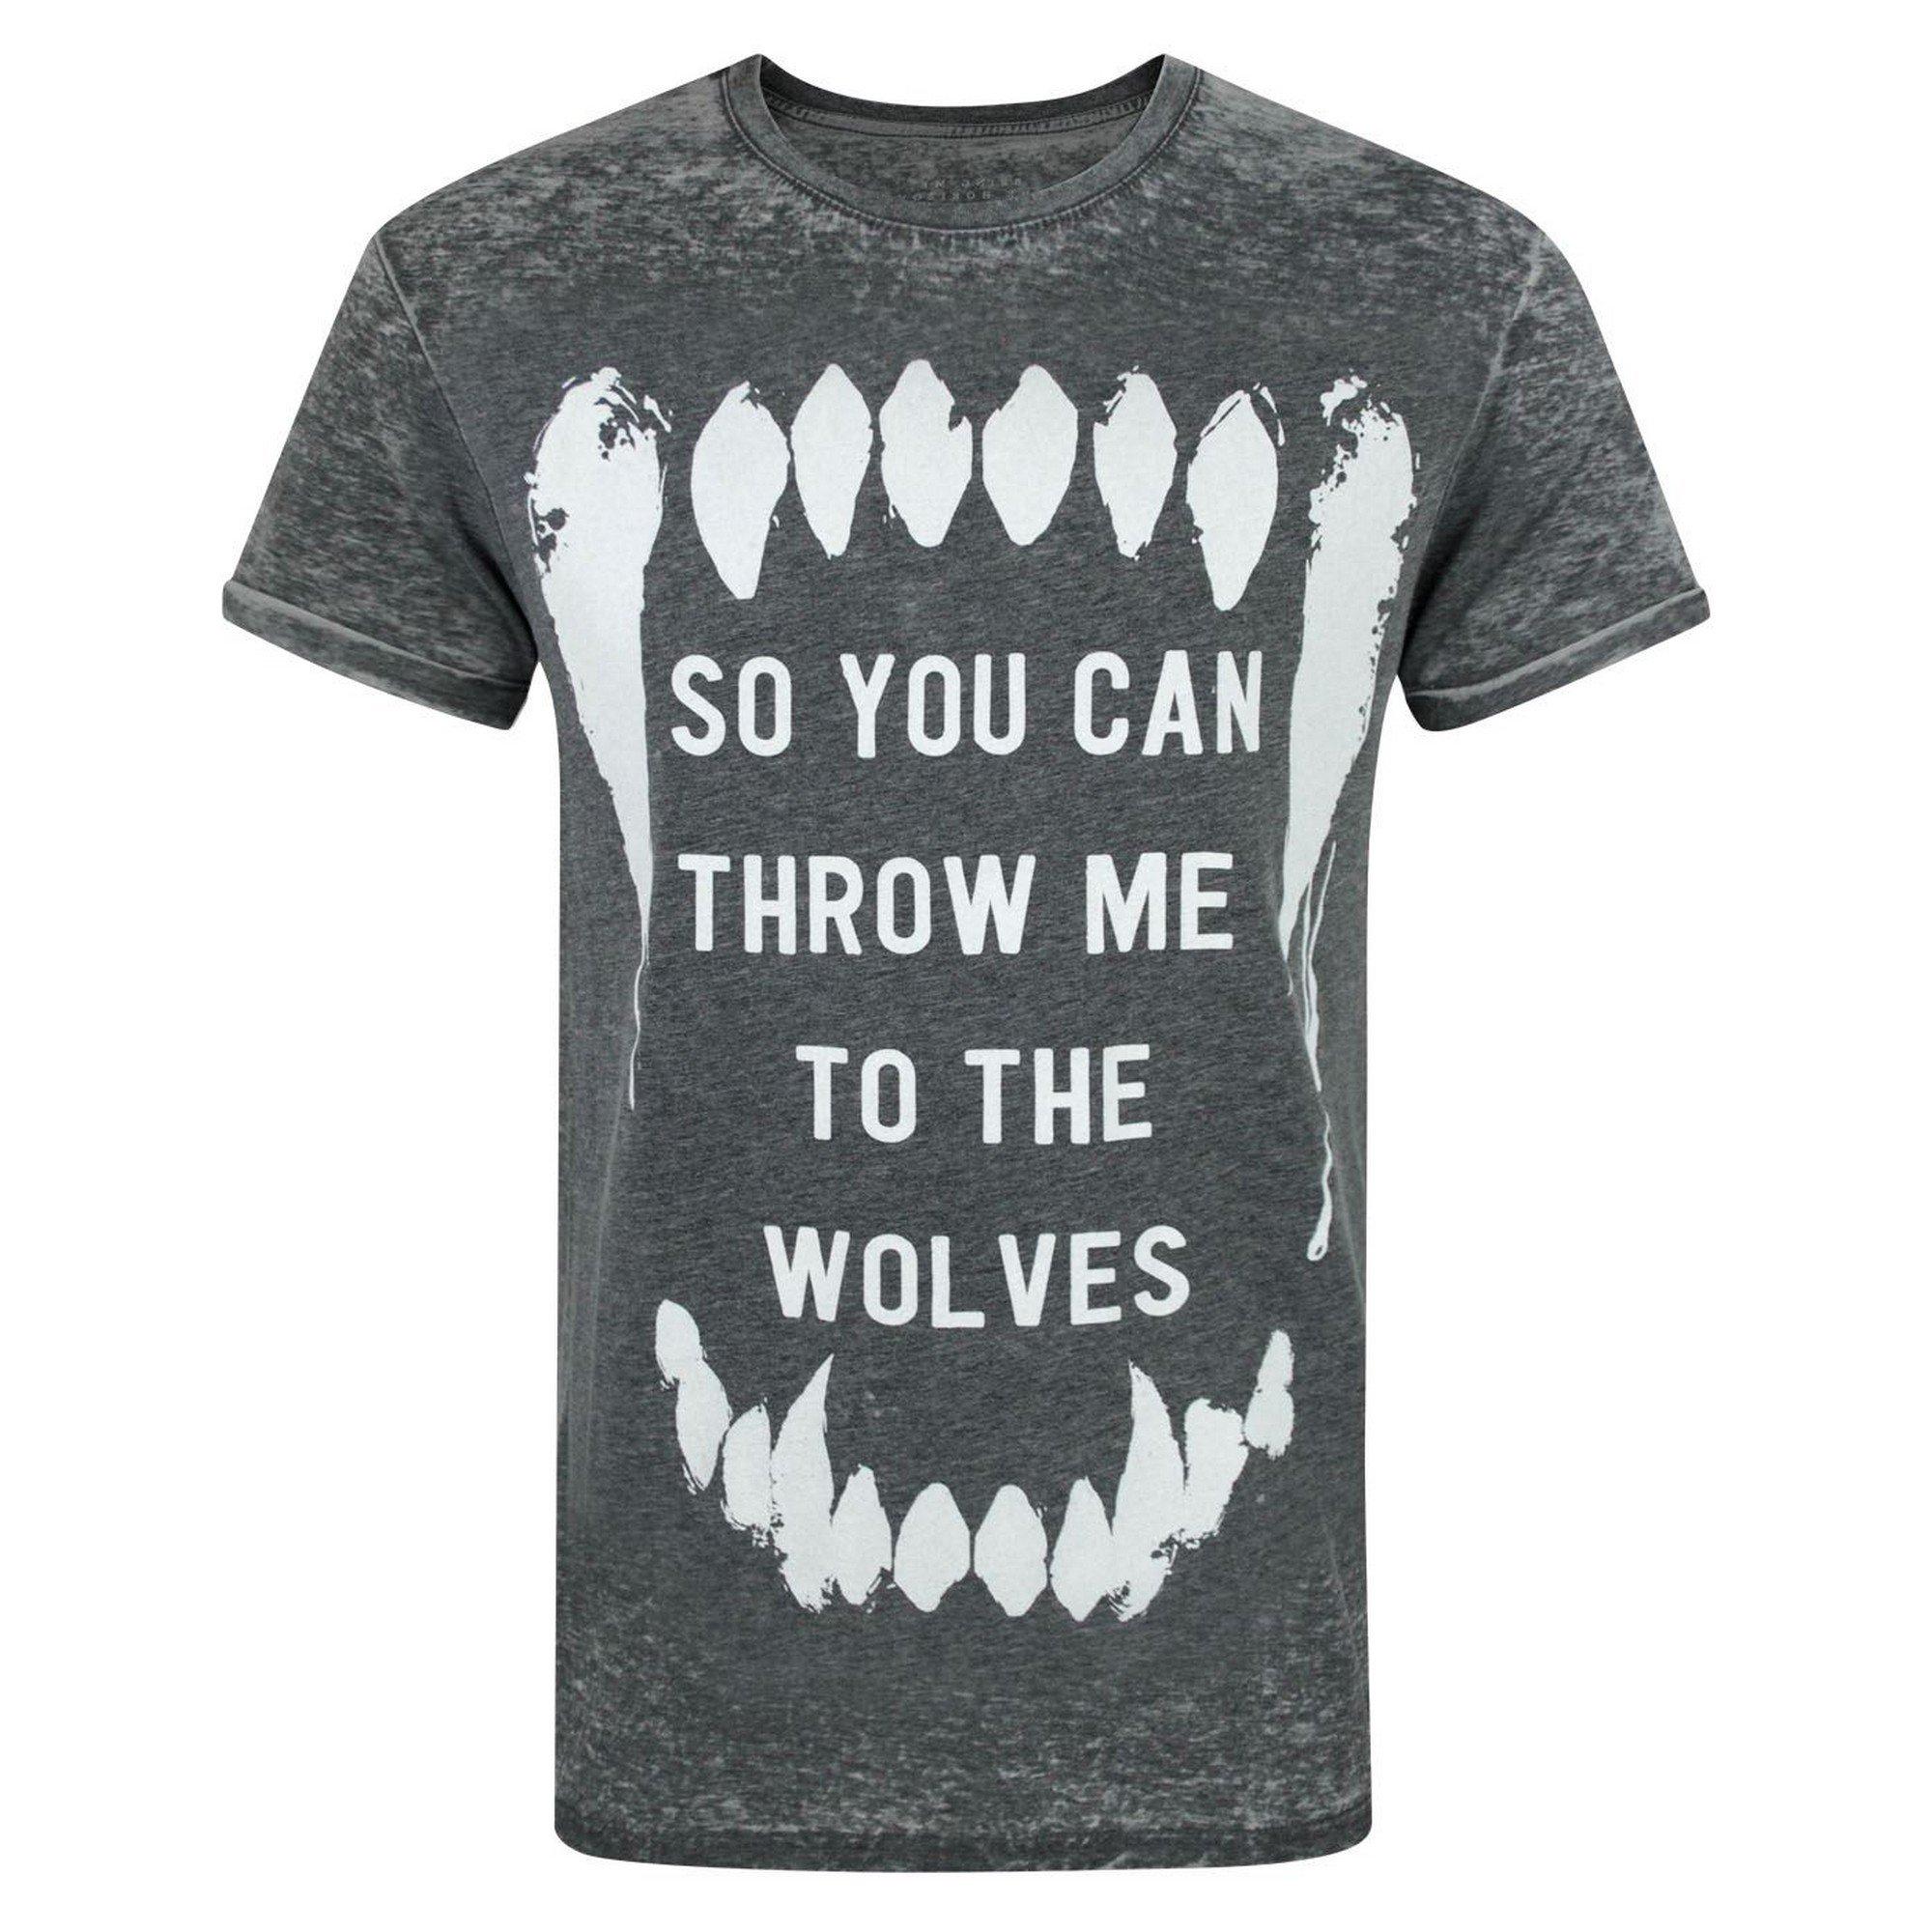 Bring Me The Horizon  Tshirt 'So You Can Throw Me To The Wolves' 